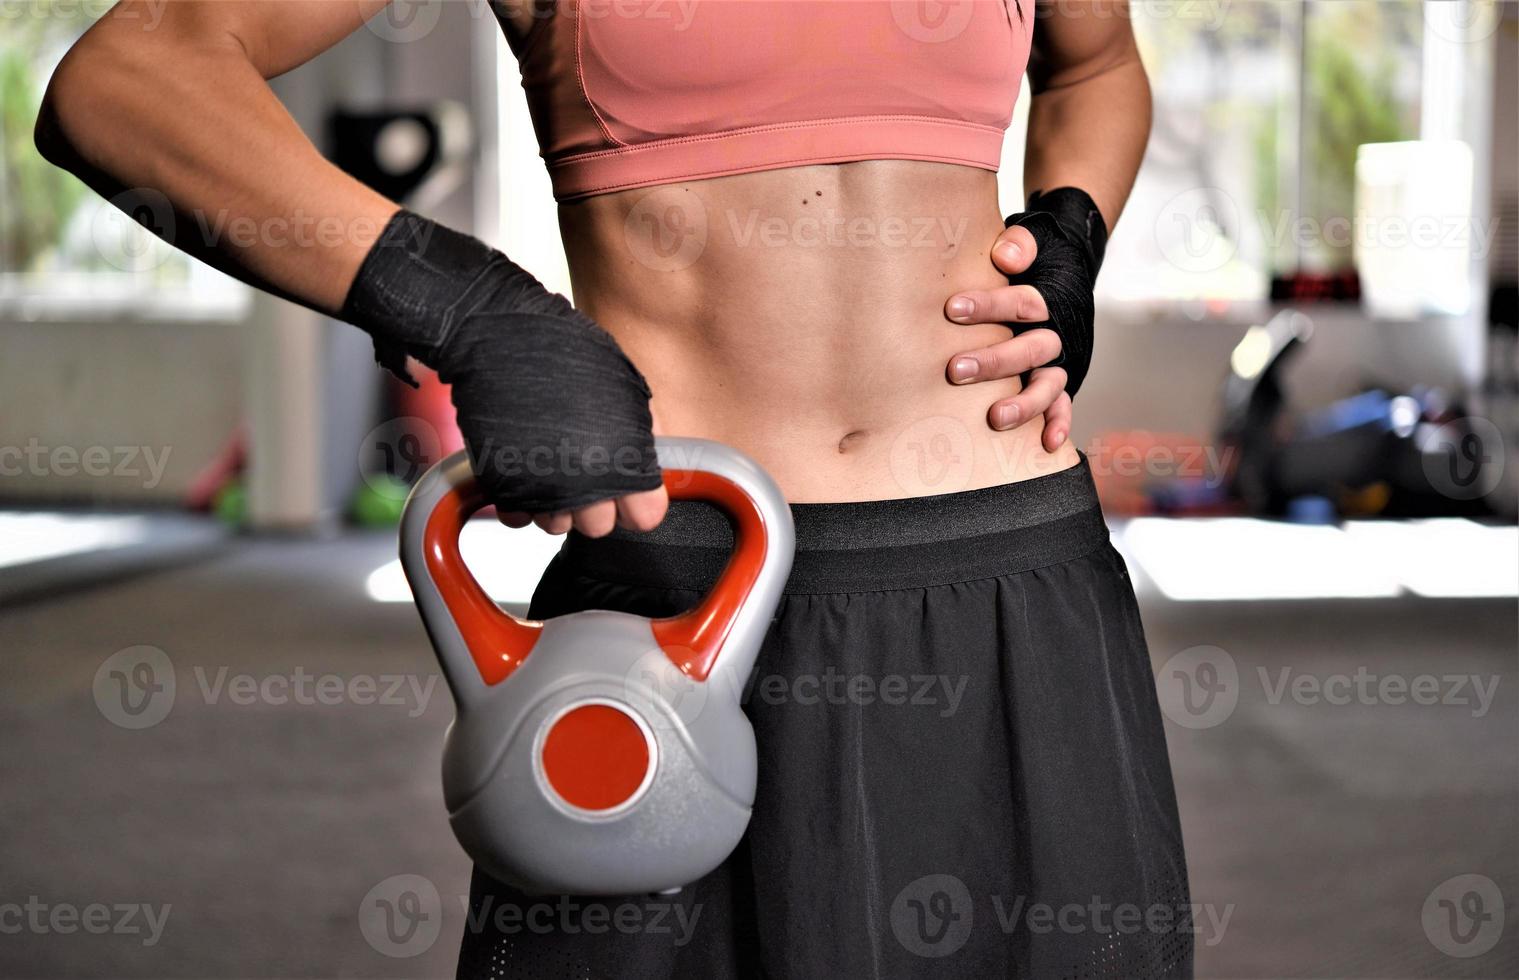 women exercise with kettle bells in a gym. concept about fitness, sport and people. selective focus photo